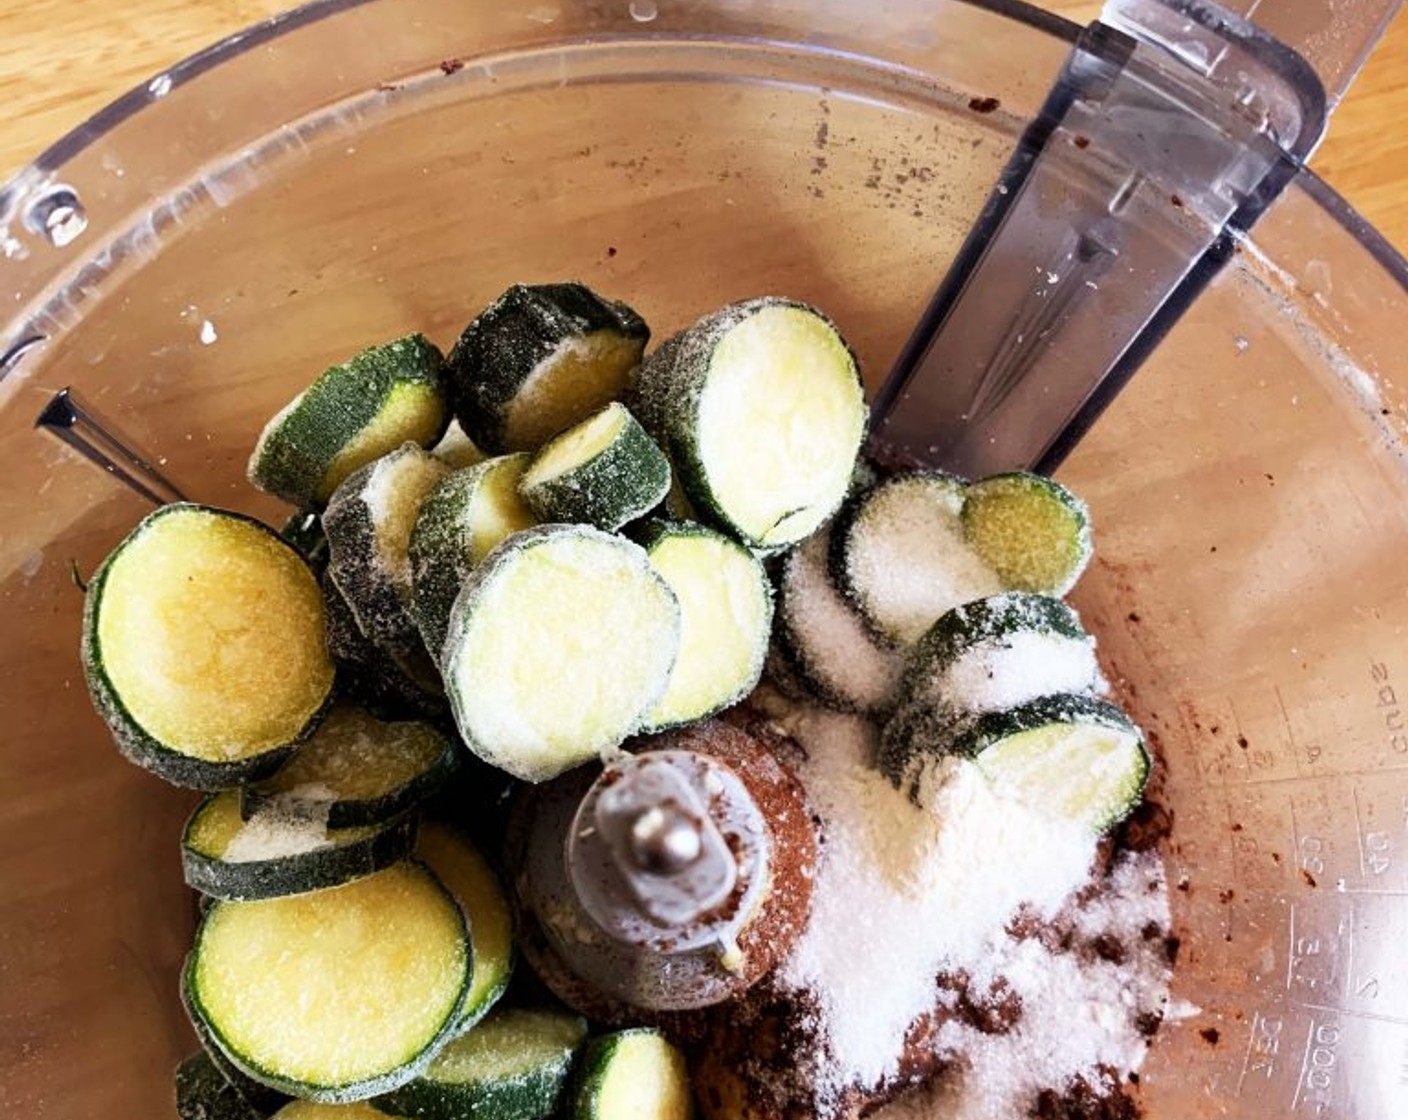 step 1 Place the Natural Peanut Butter (1/4 cup), Zucchini (1 1/2 cups), Unsweetened Cocoa Powder (2 1/2 Tbsp), Granulated Erythritol (1 Tbsp), and Xanthan Gum (1/2 tsp) in a blender and start processing until you get a creamy and smooth texture. Do not add any milk or water, scrape down the sides of your blender during the process and let it blend until done.